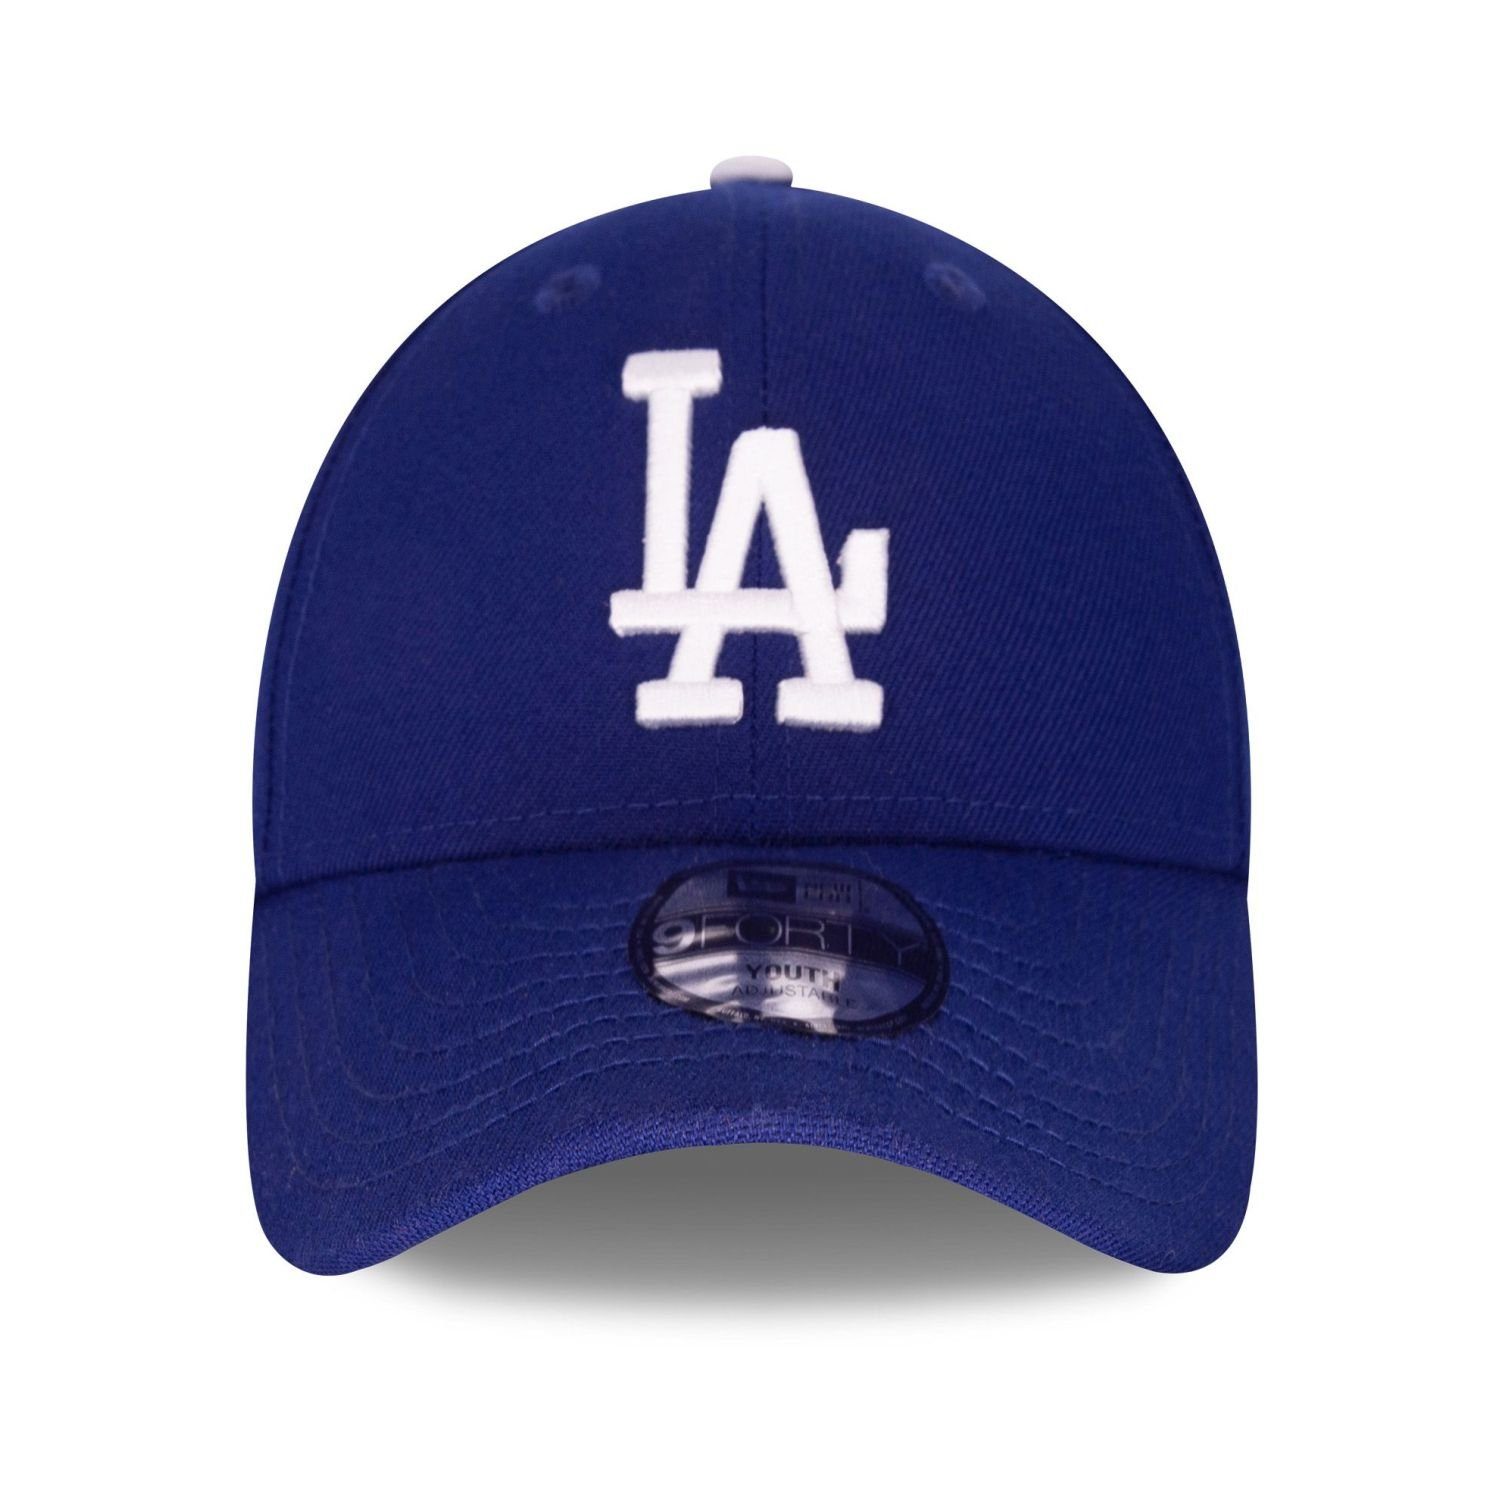 New Era Baseball Cap Youth LEAGUE Dodgers Los Angeles 9Forty